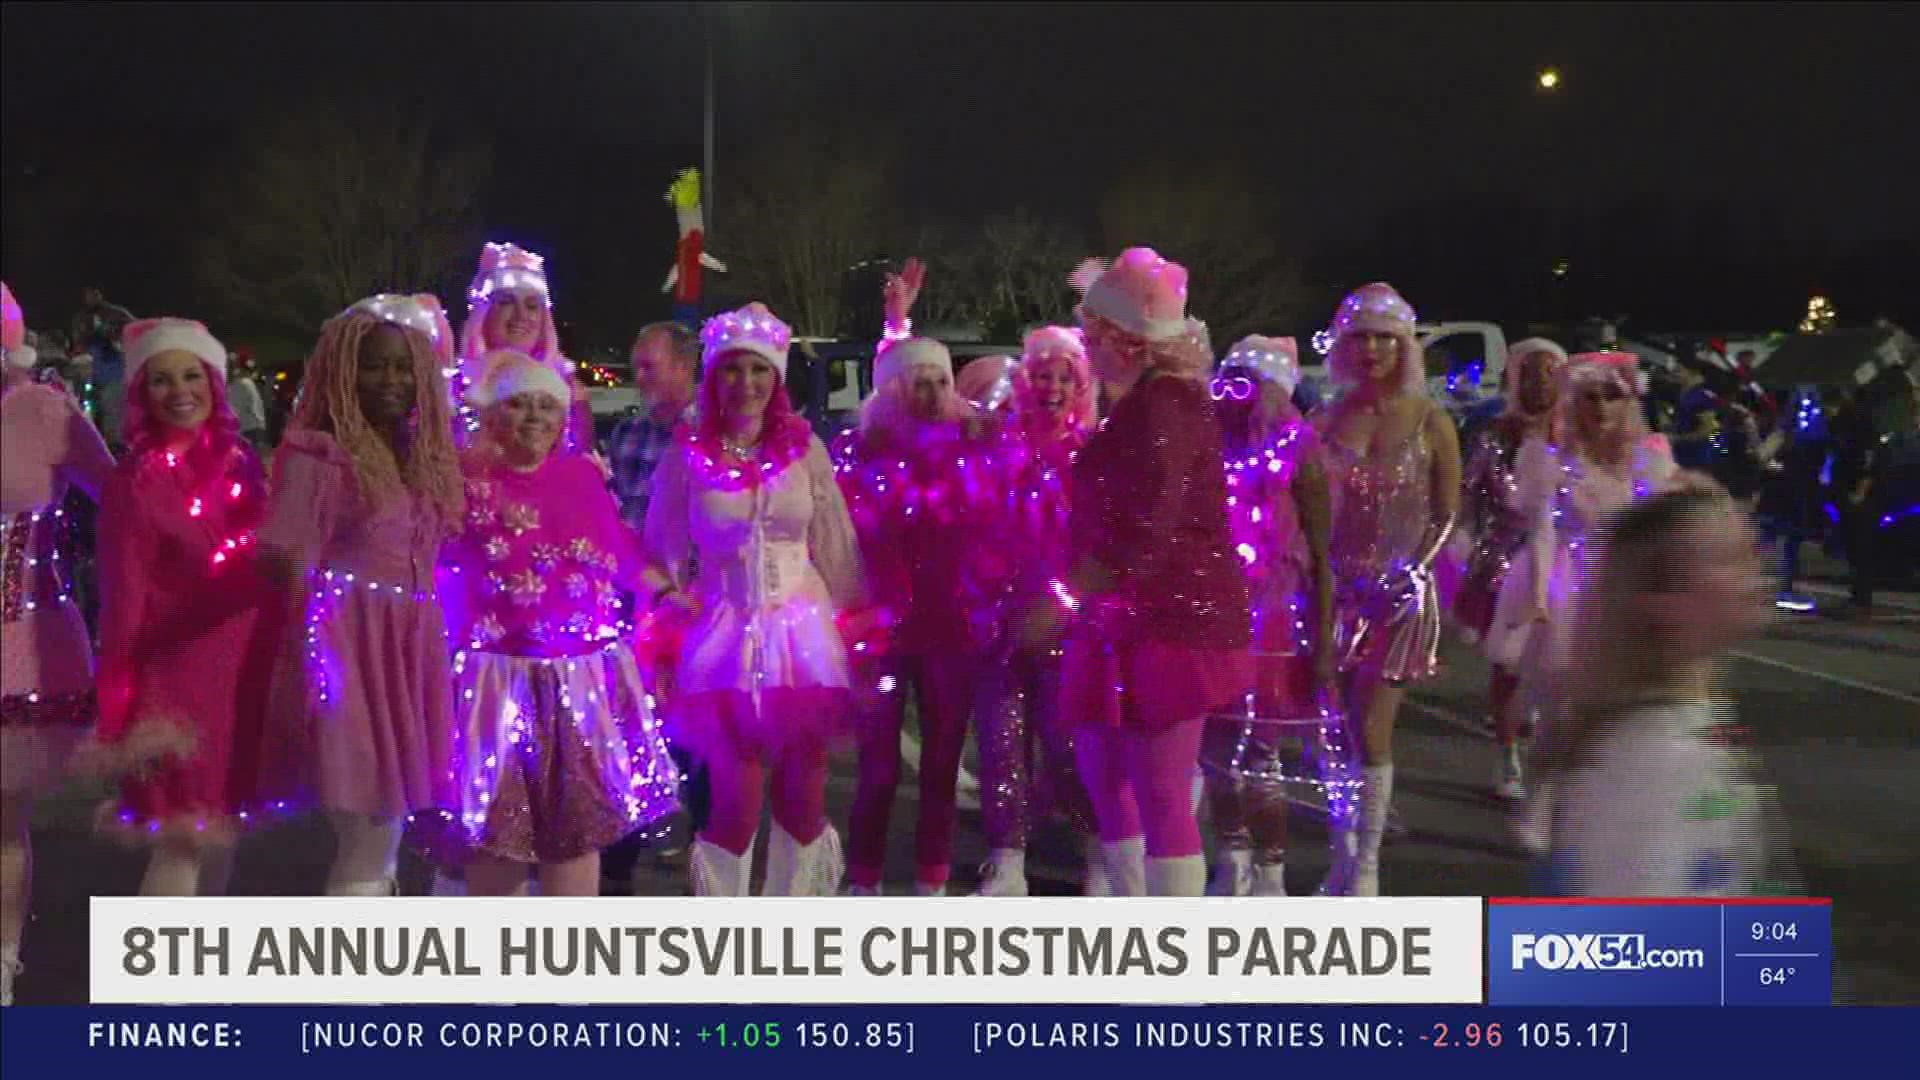 Huntsville's 8th annual Christmas parade happened tonight. If you didn't get a chance to make it out, here's a little sneak peek of all of the holiday fun!